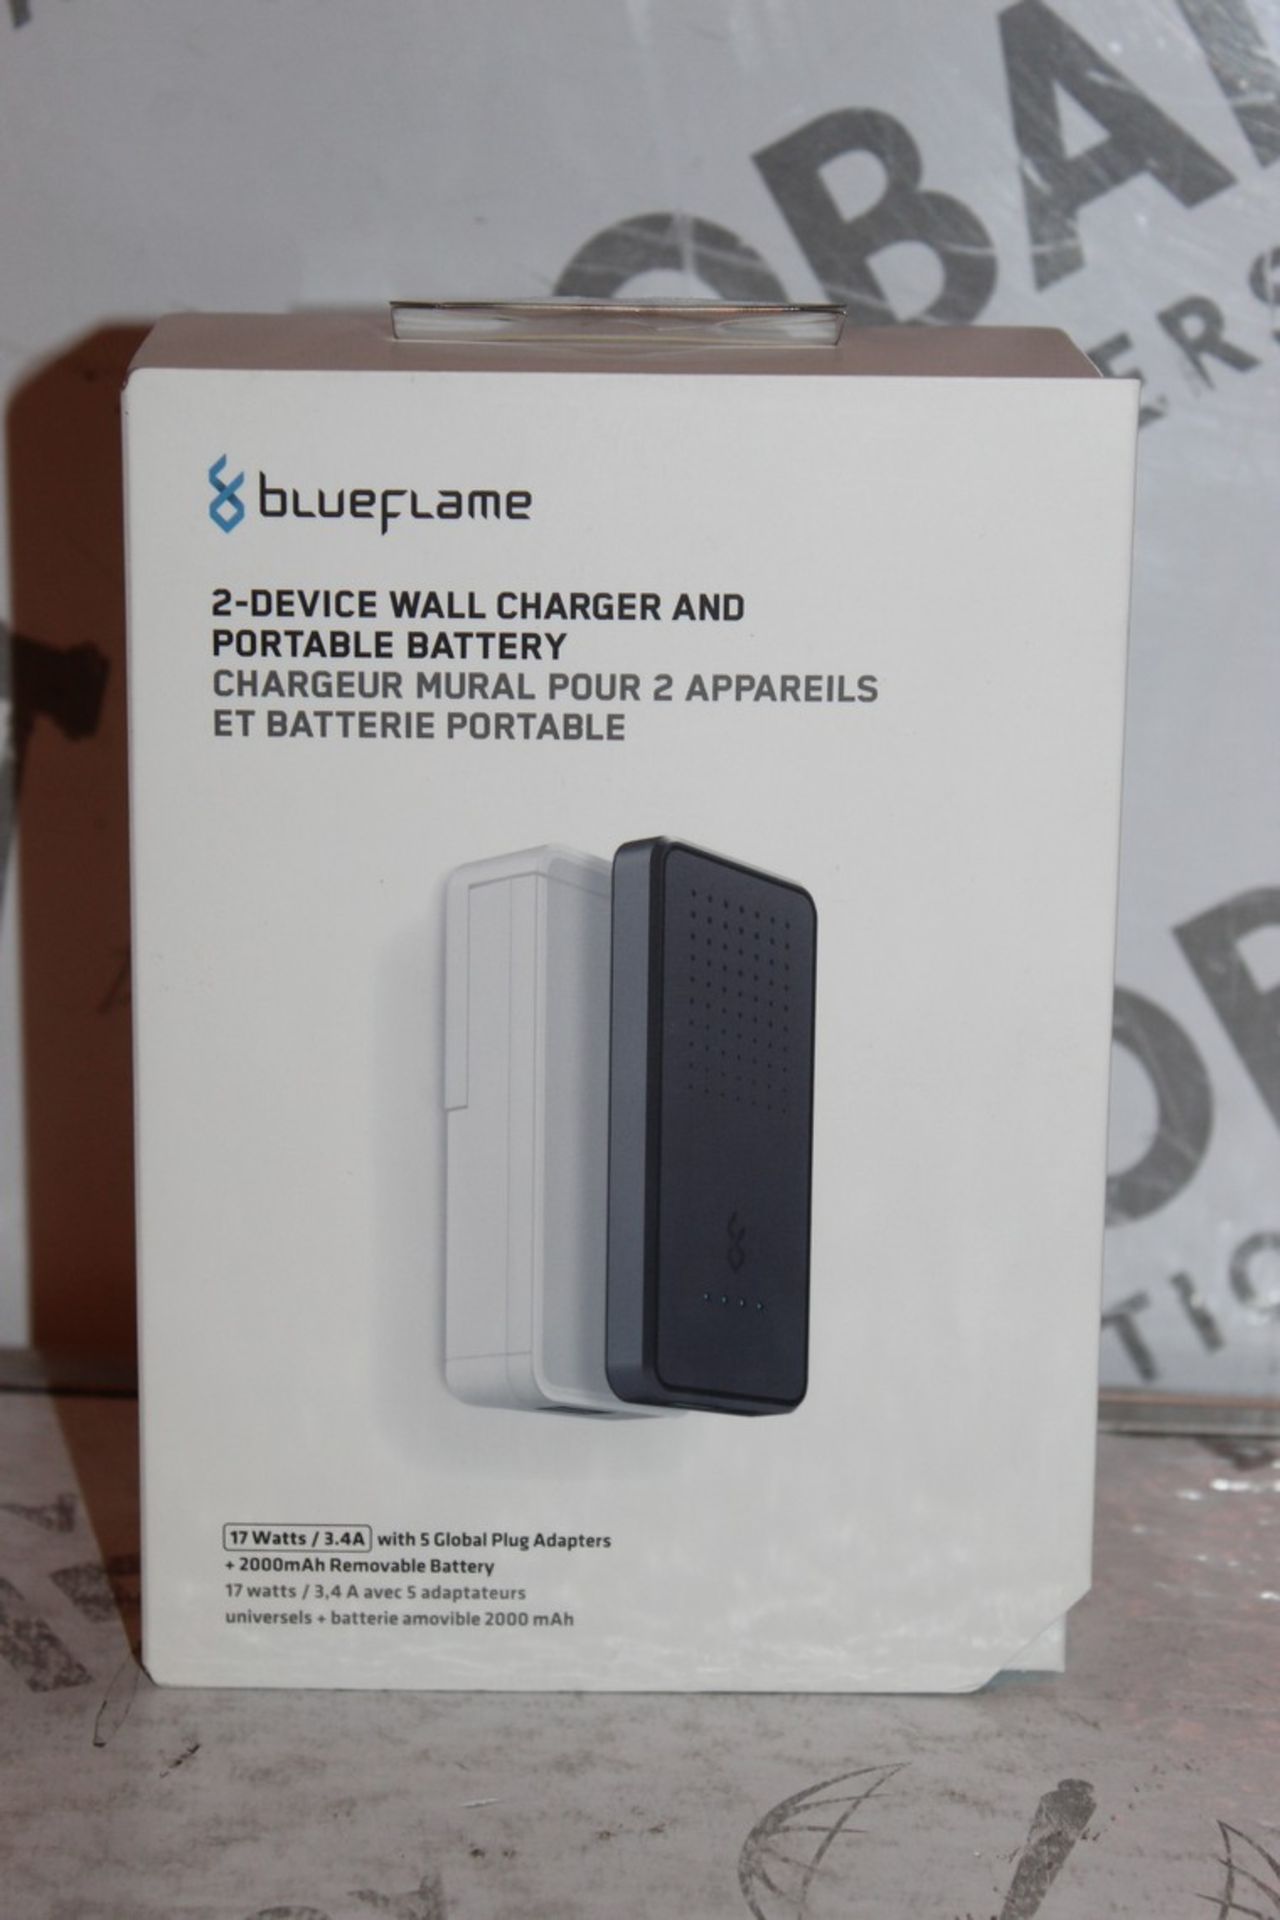 Lot to Contain 24 Boxed Brand New Blue Flame 2 Device Wall Charger and Portable Battery Unit